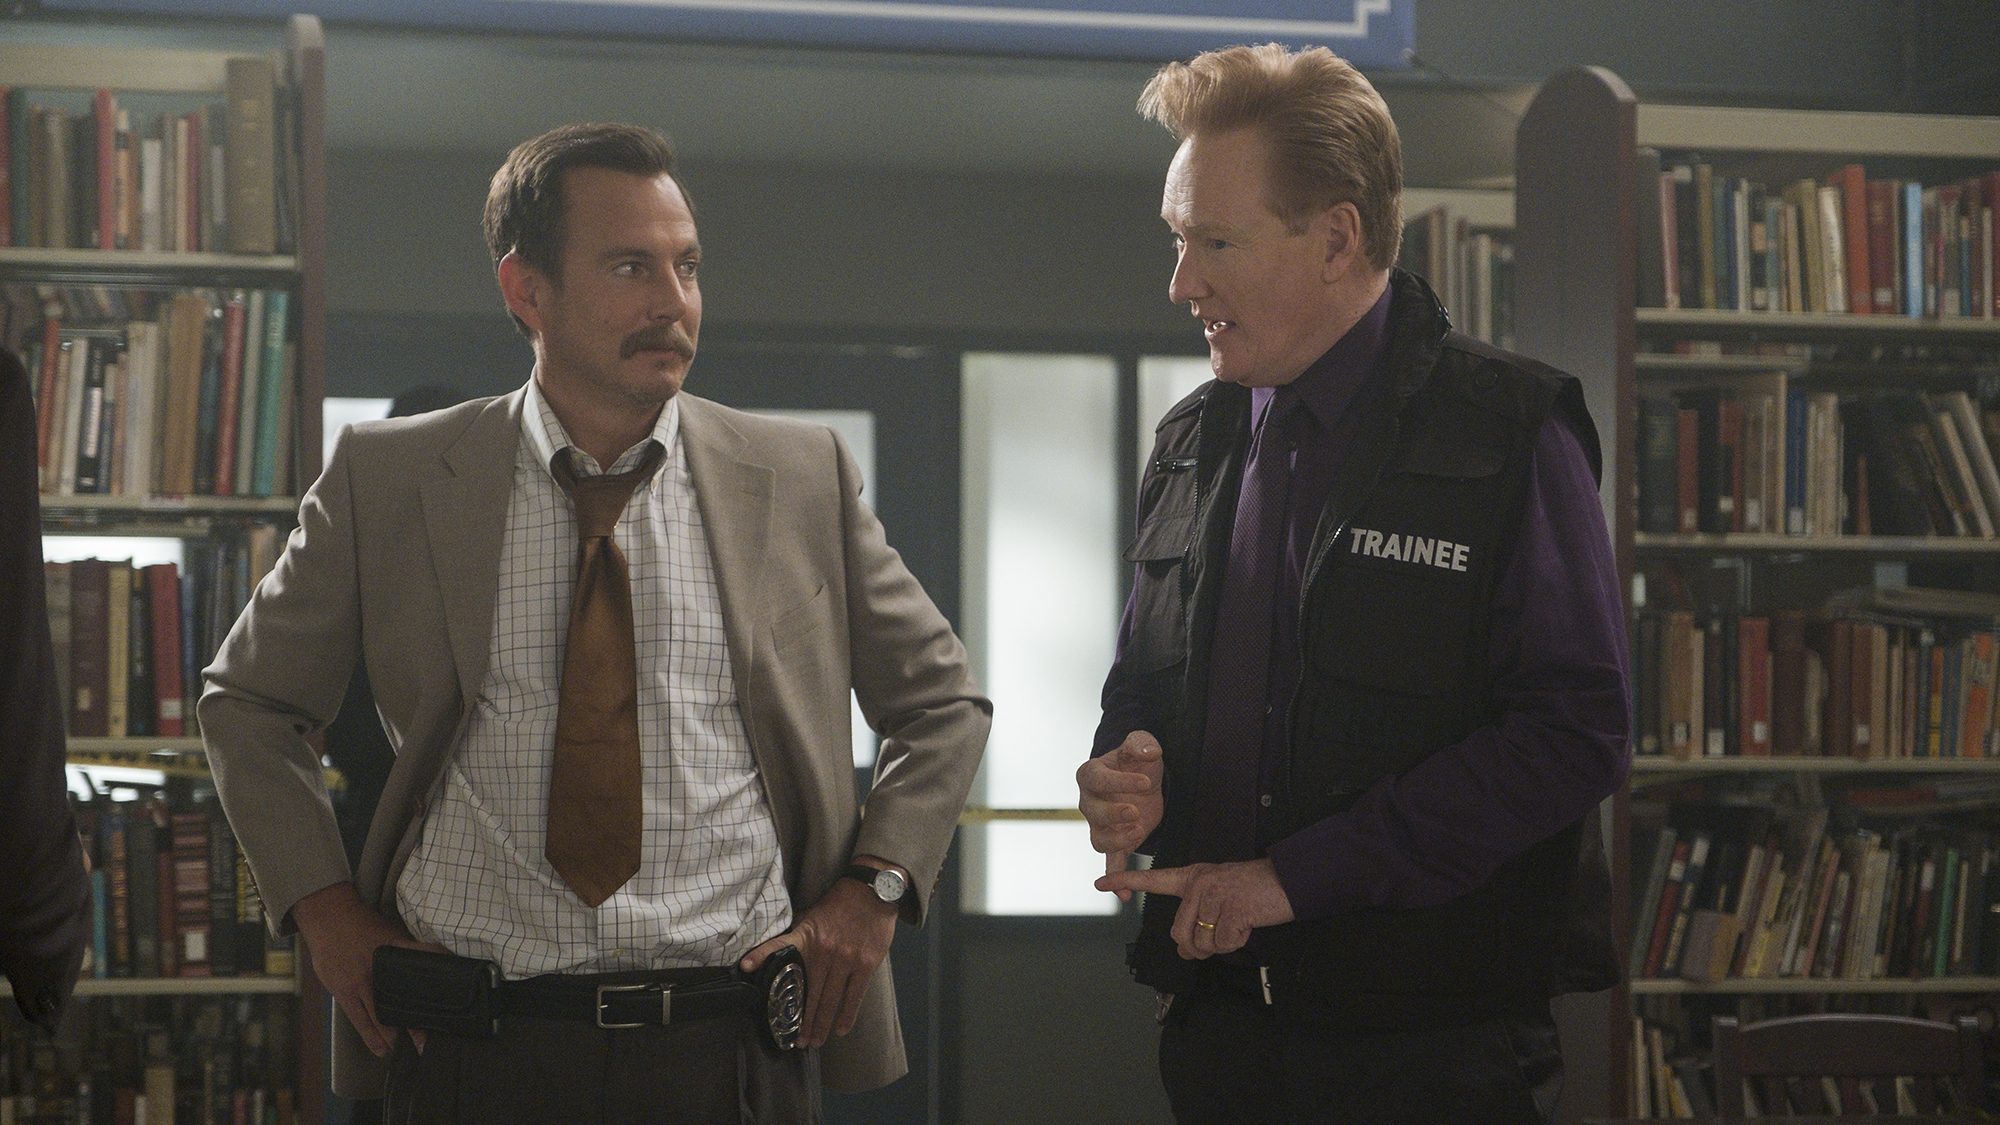 (L to R) Conan O'Brien as Guest 101, Will Arnett as Terry Seattle in episode 101 of Murderville, one of the best netflix comedies